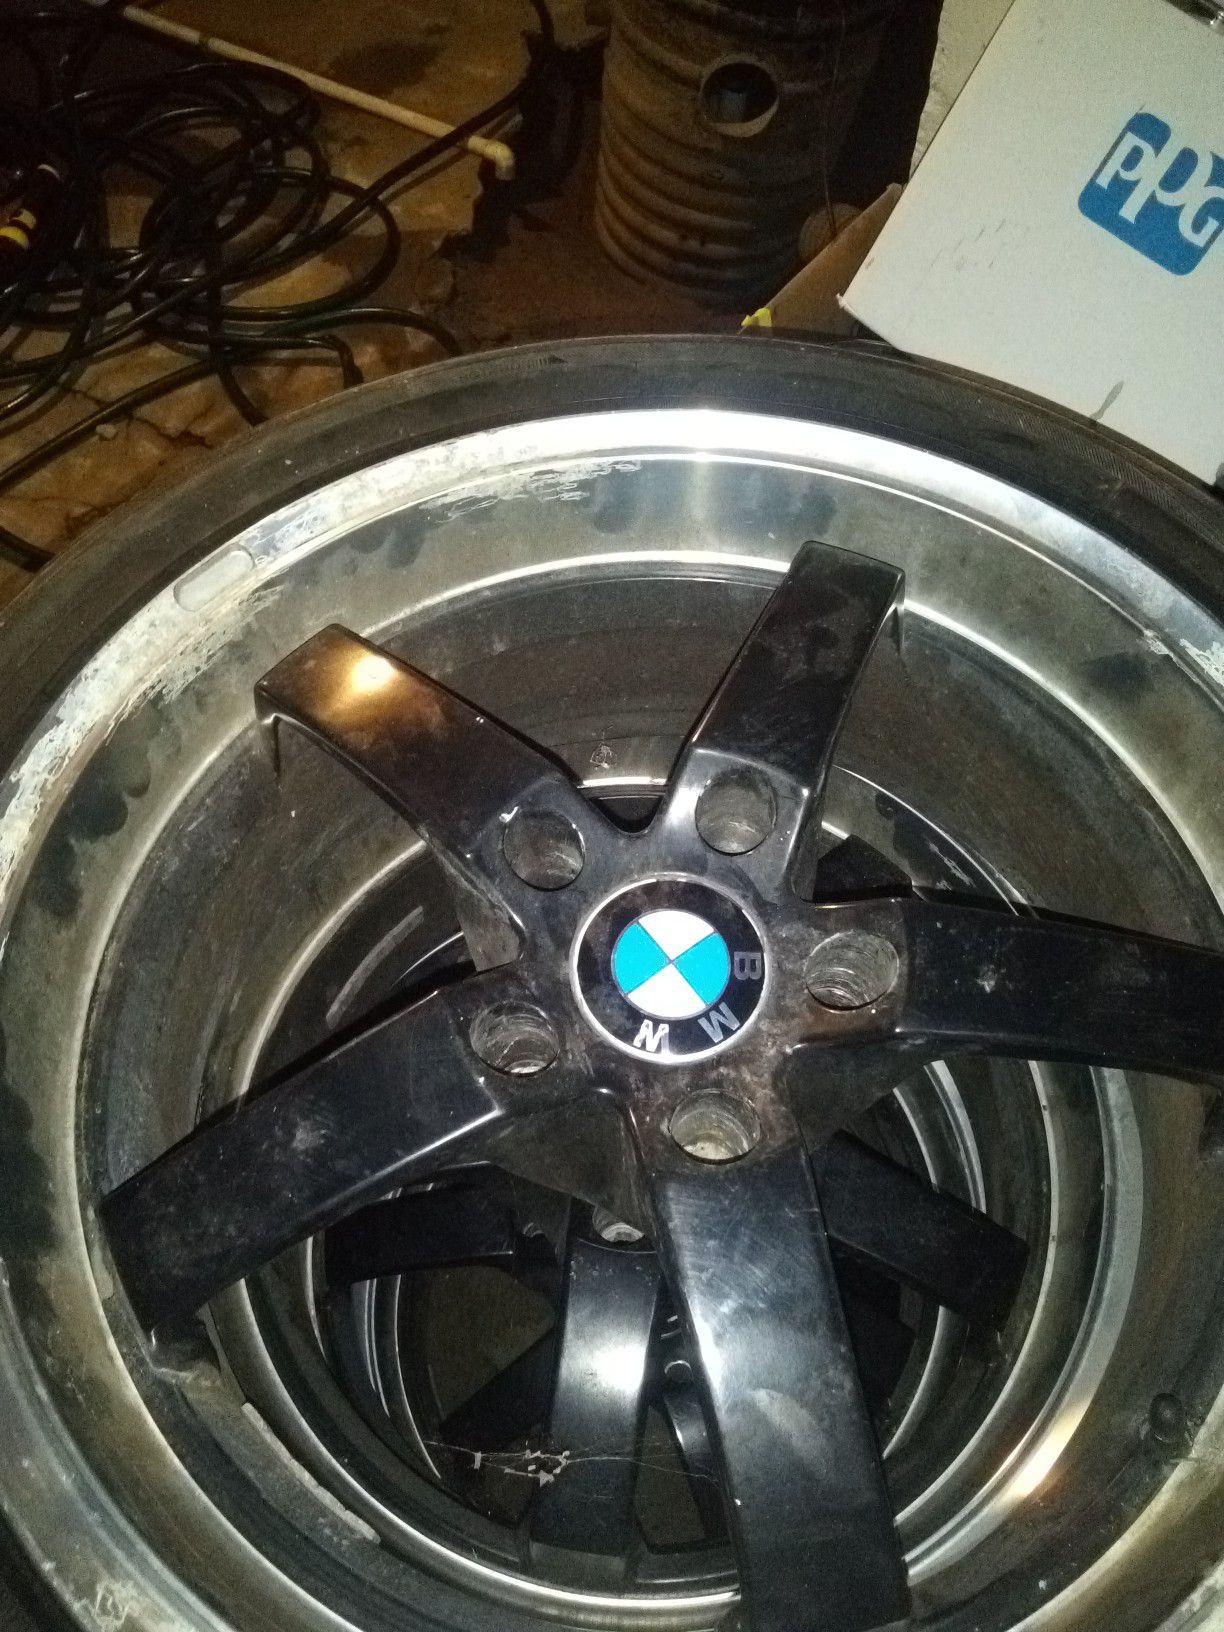 18"BMW rims and tires